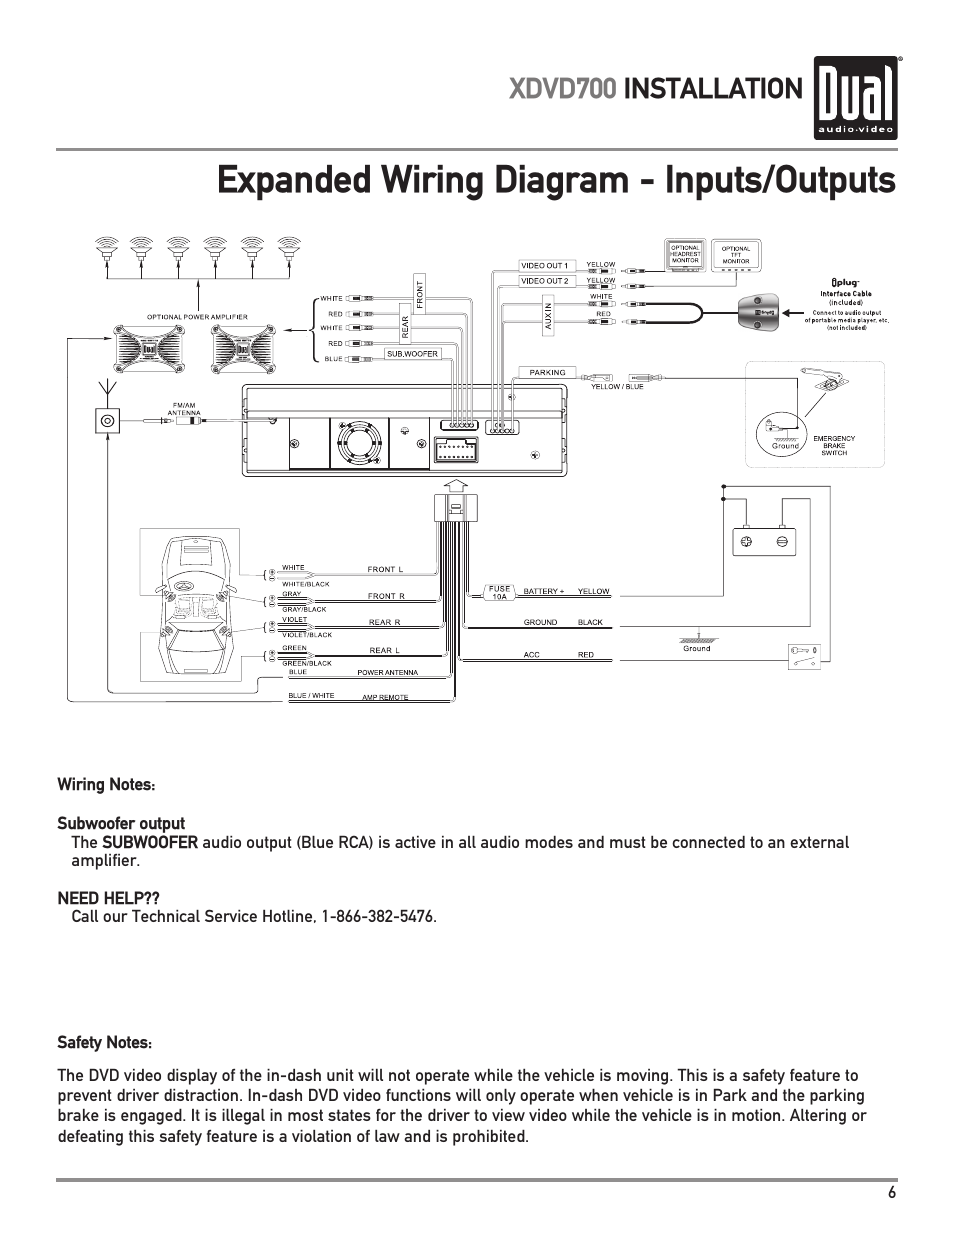 Expanded Wiring Diagram  Outputs  Xdvd700